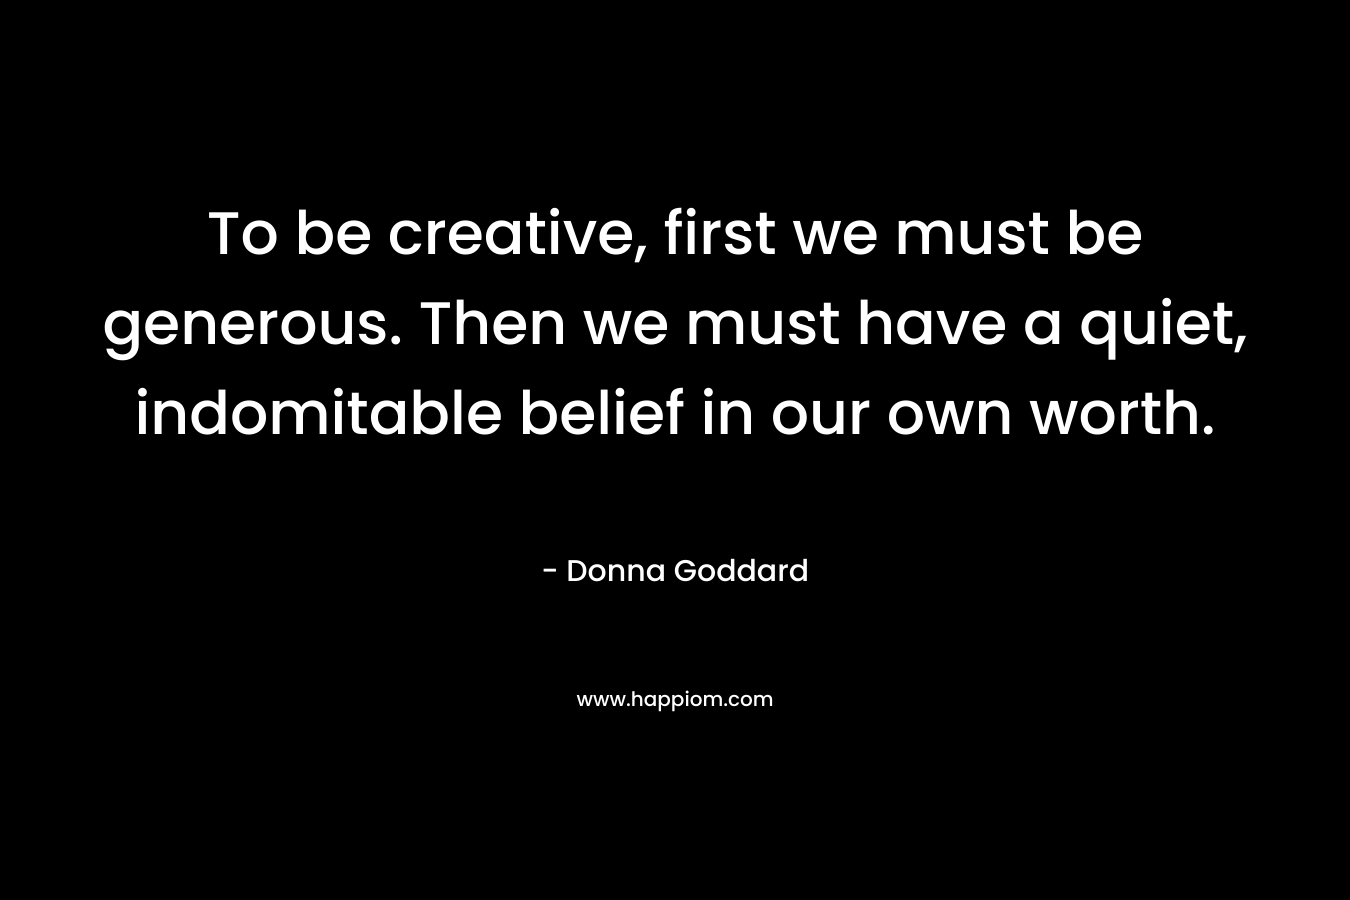 To be creative, first we must be generous. Then we must have a quiet, indomitable belief in our own worth.